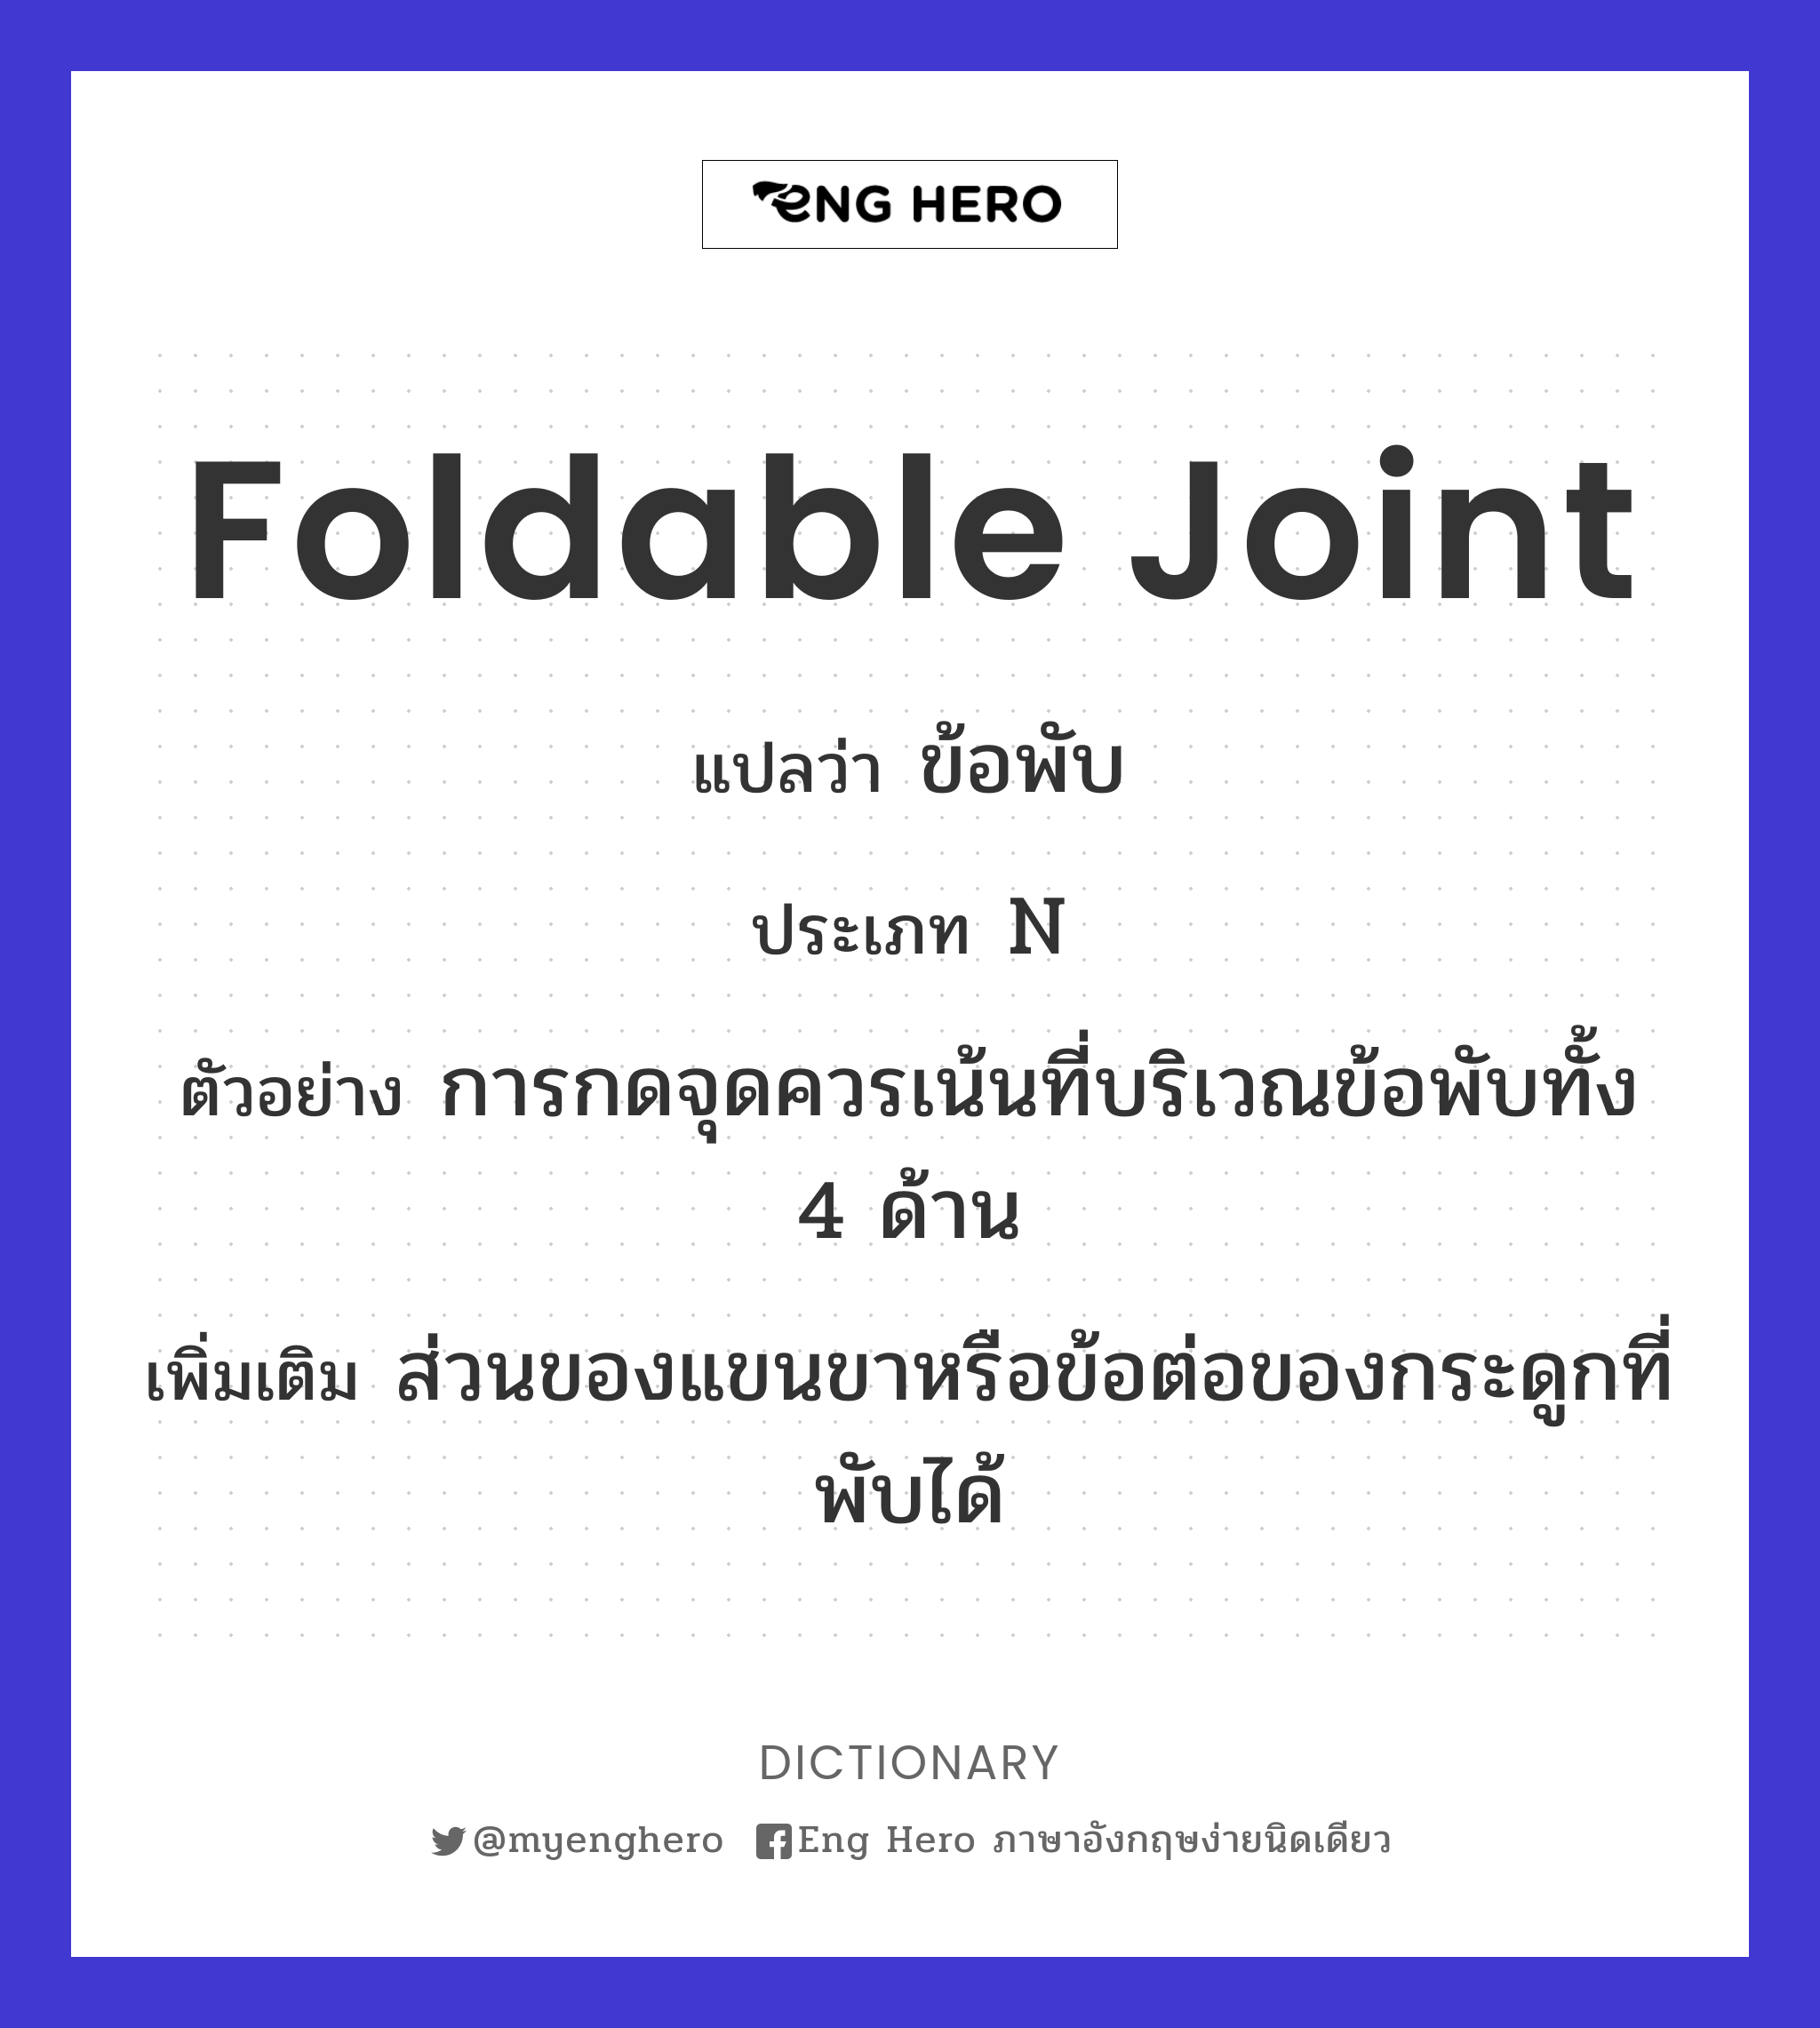 foldable joint